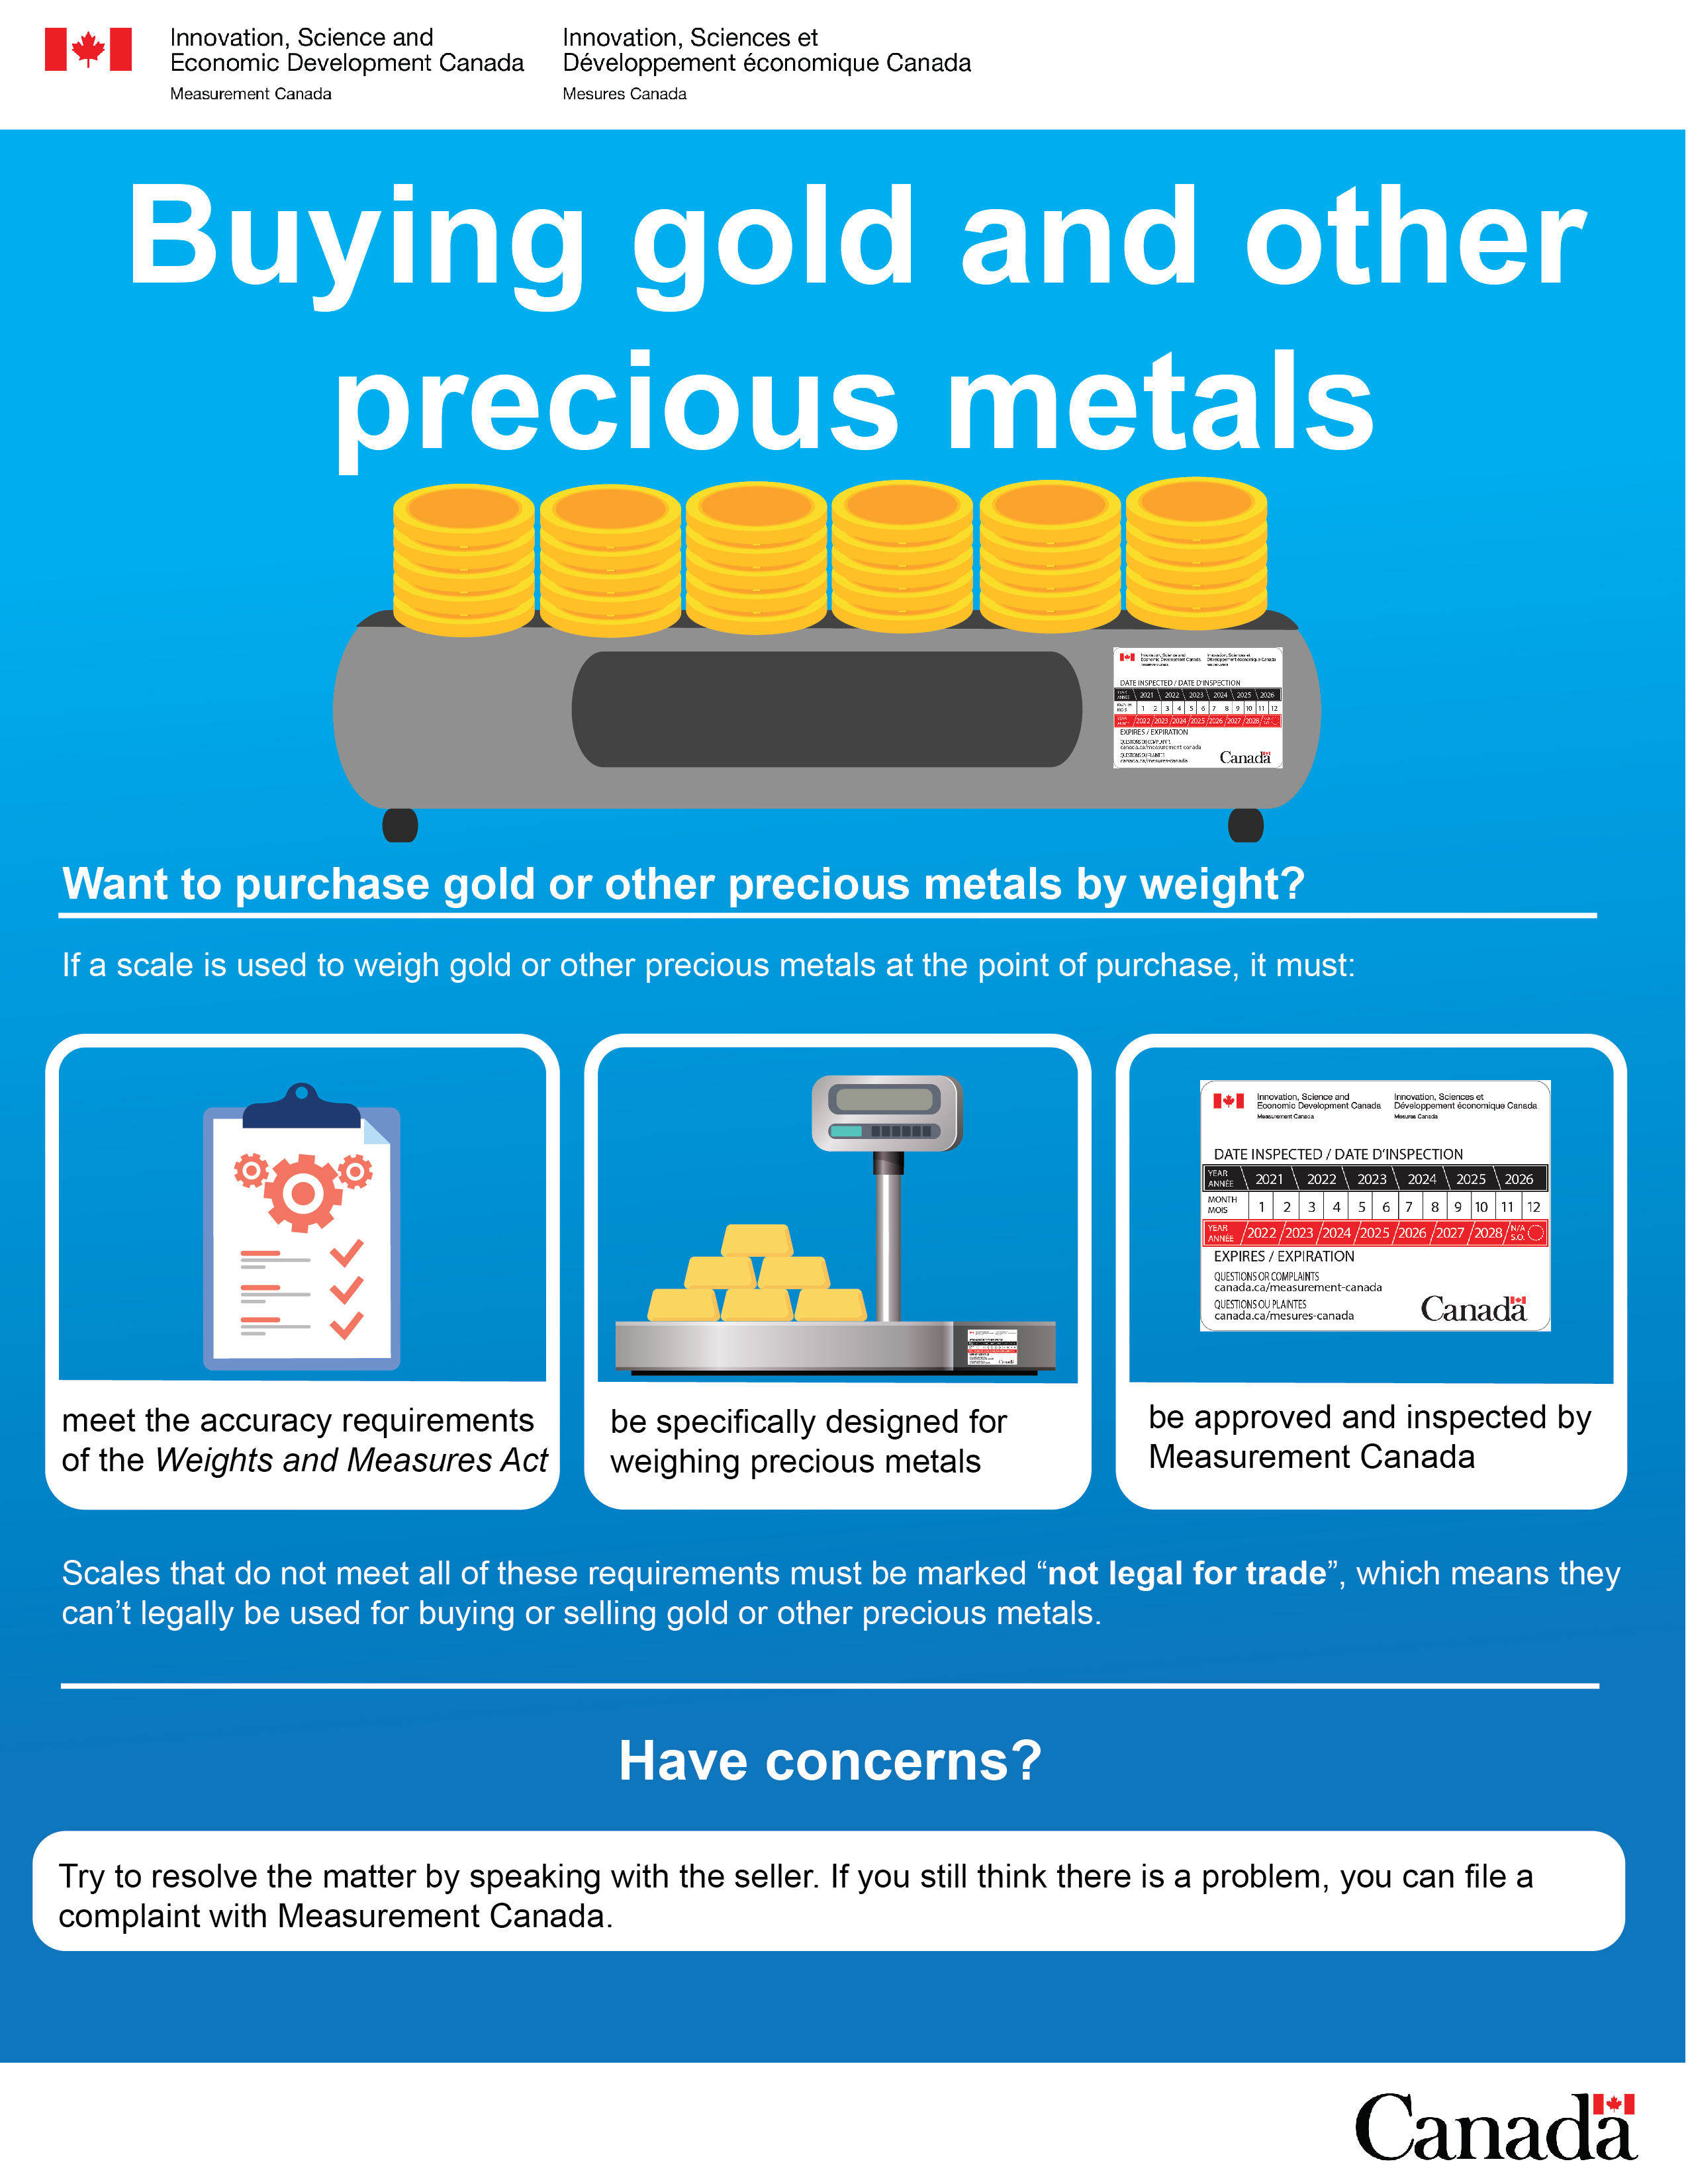 Buying gold and other precious metals (the long description is located below the image)